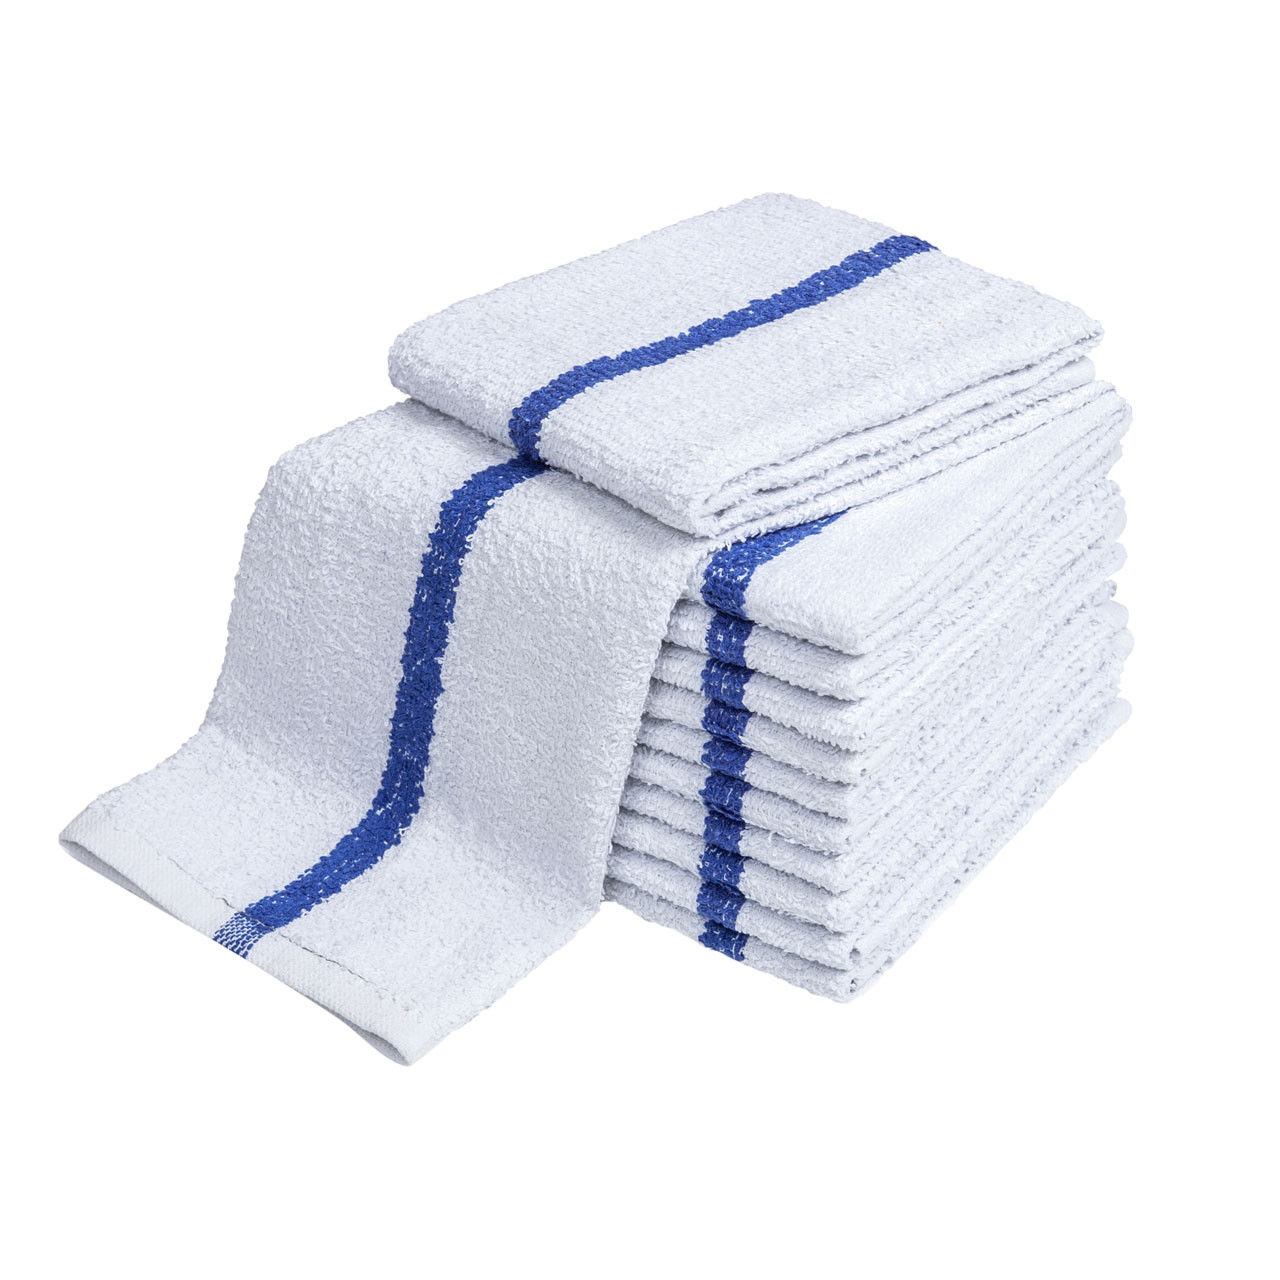 How do ADI Full Terry, Center Stripe bar towels feel and what is their function?